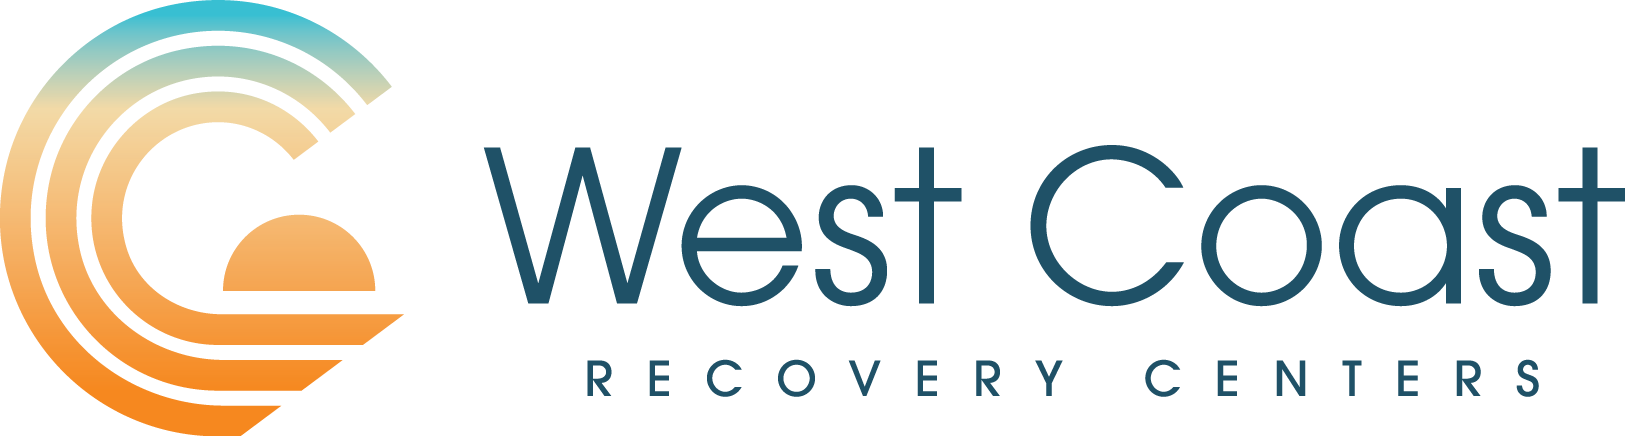 Their logo (not to be confused for West Coast Rec)